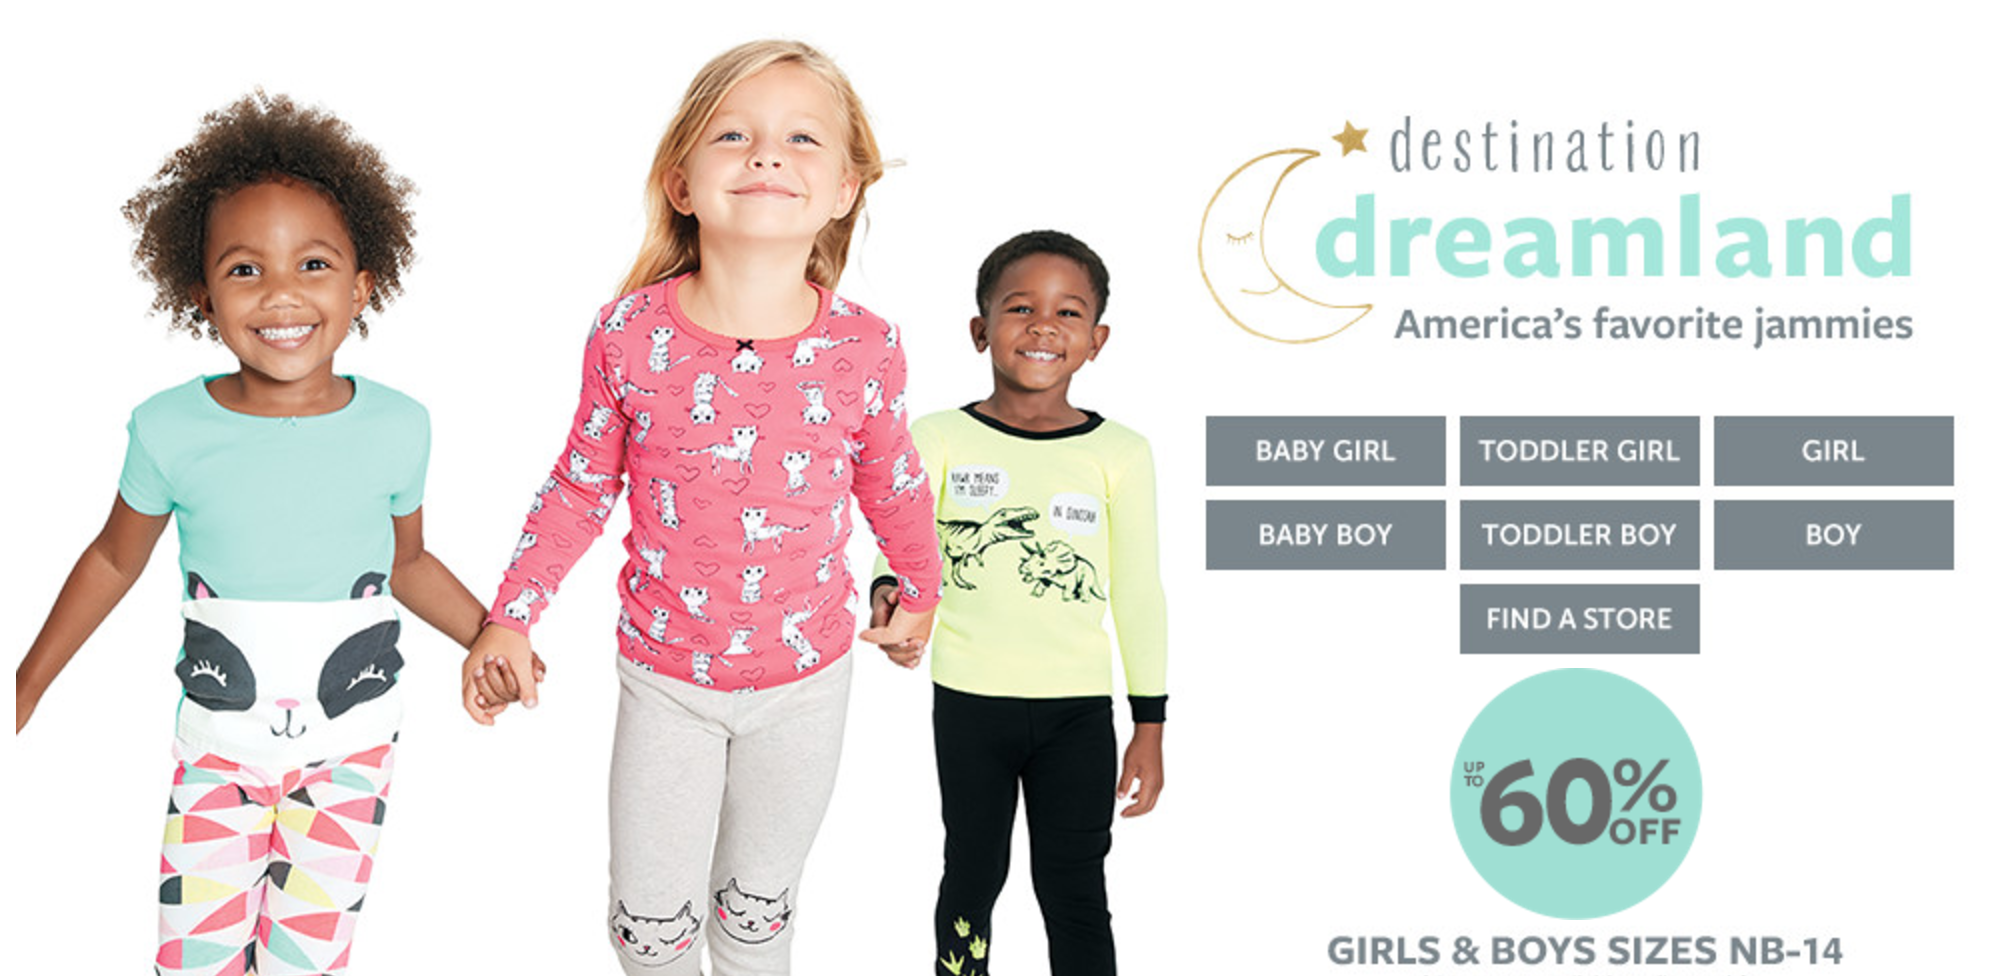 Carter’s PJ’s 60% Off Today Only! 